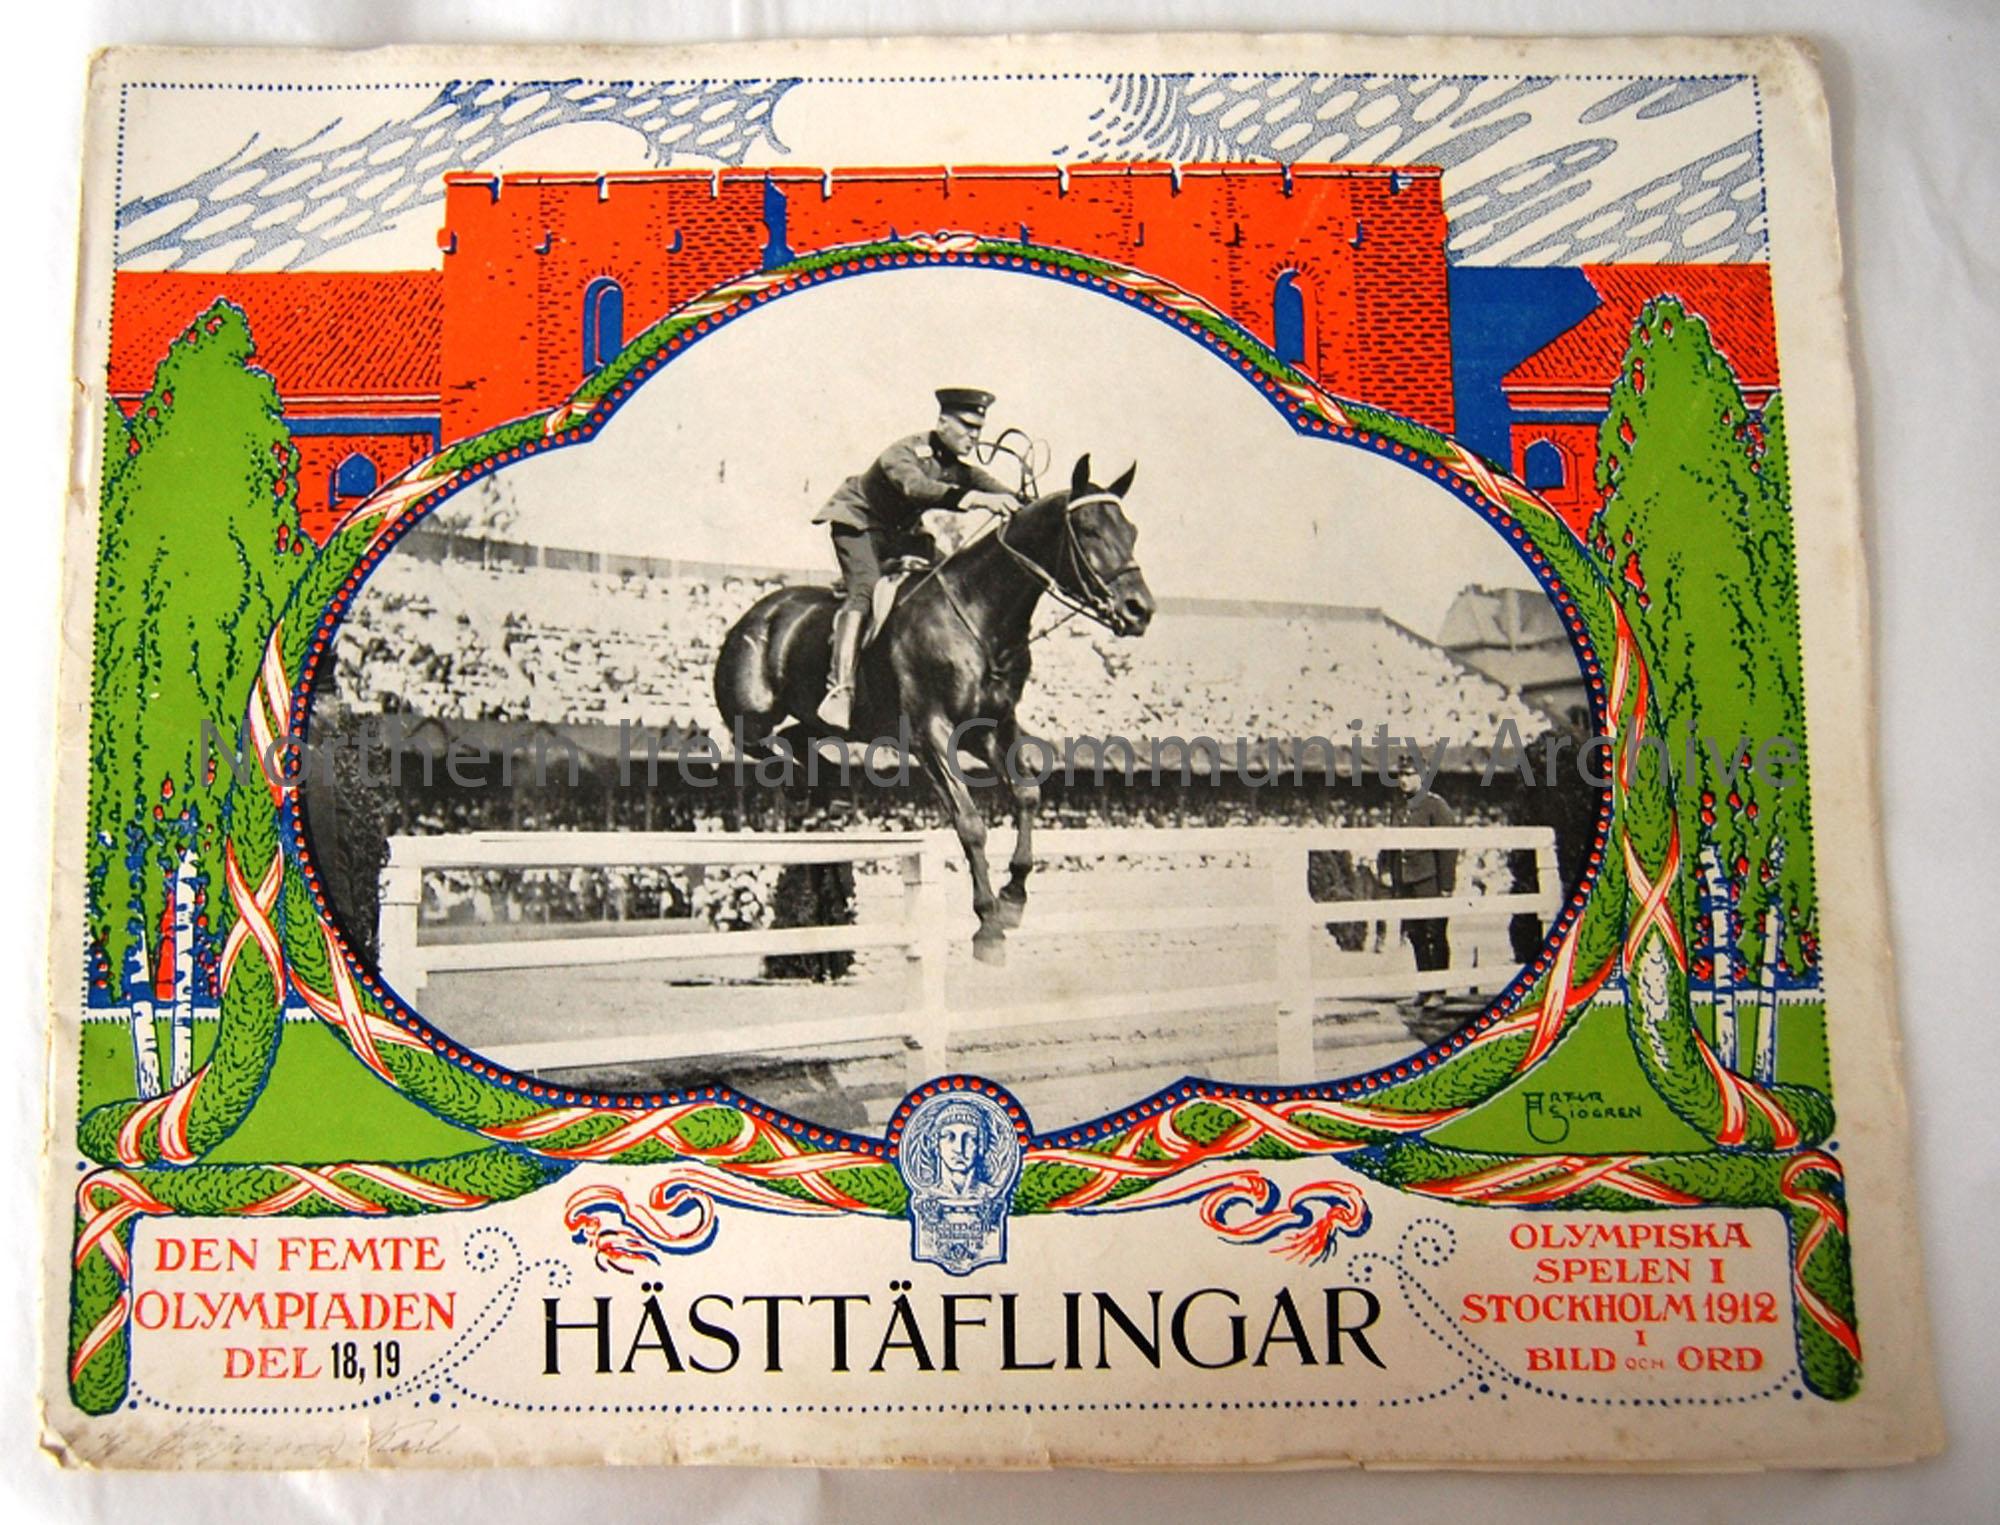 After the 1912 Olympic games 24 booklets were produced in Swedish. This issue features Equestrian